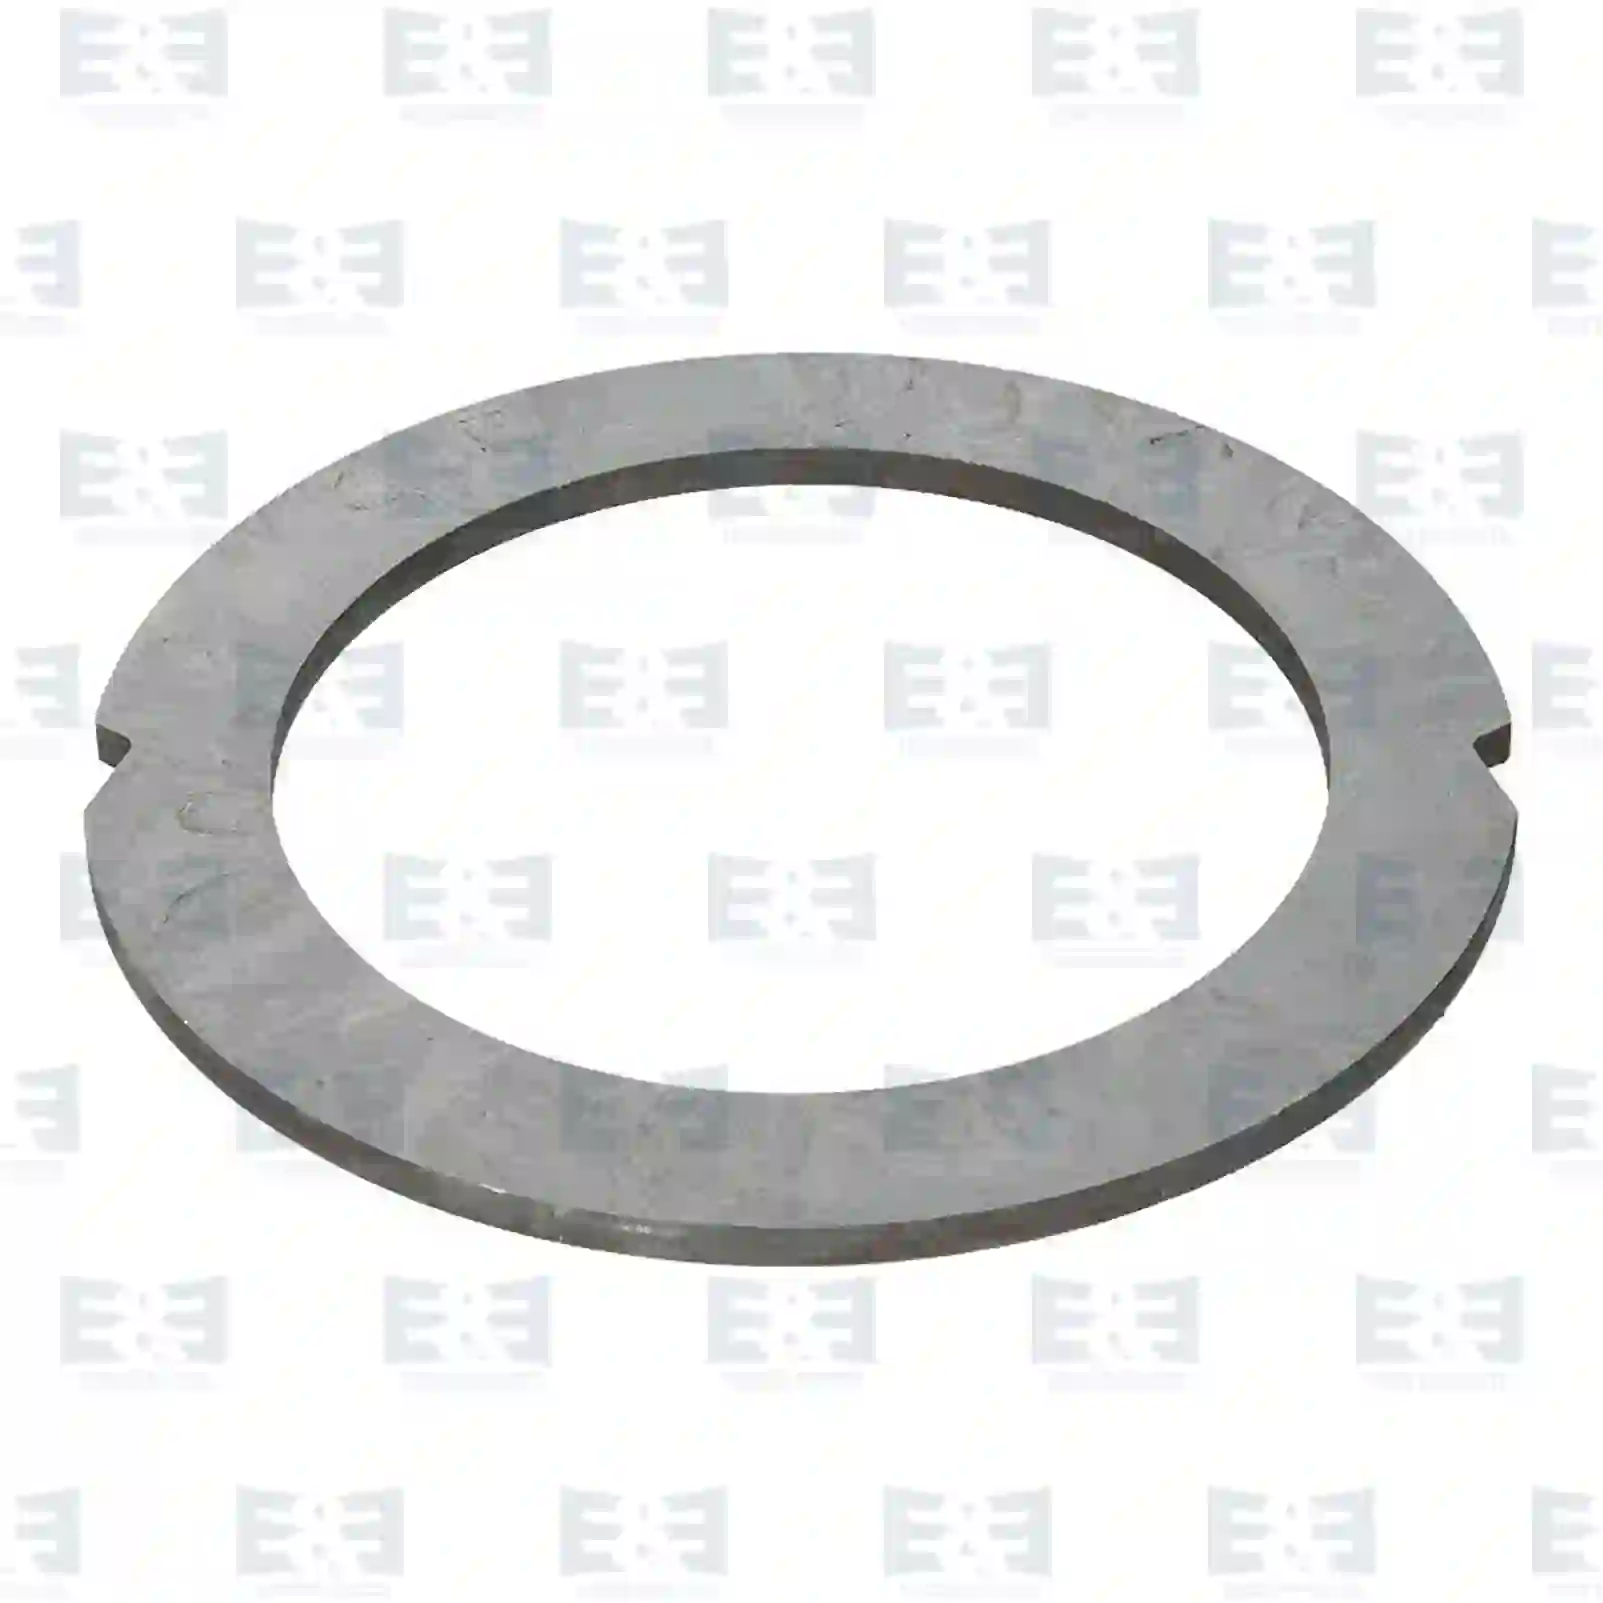 Bearing Bracket, Bogie Suspension Thrust washer, EE No 2E2281063 ,  oem no:1509219, ZG30173-0008, E&E Truck Spare Parts | Truck Spare Parts, Auotomotive Spare Parts